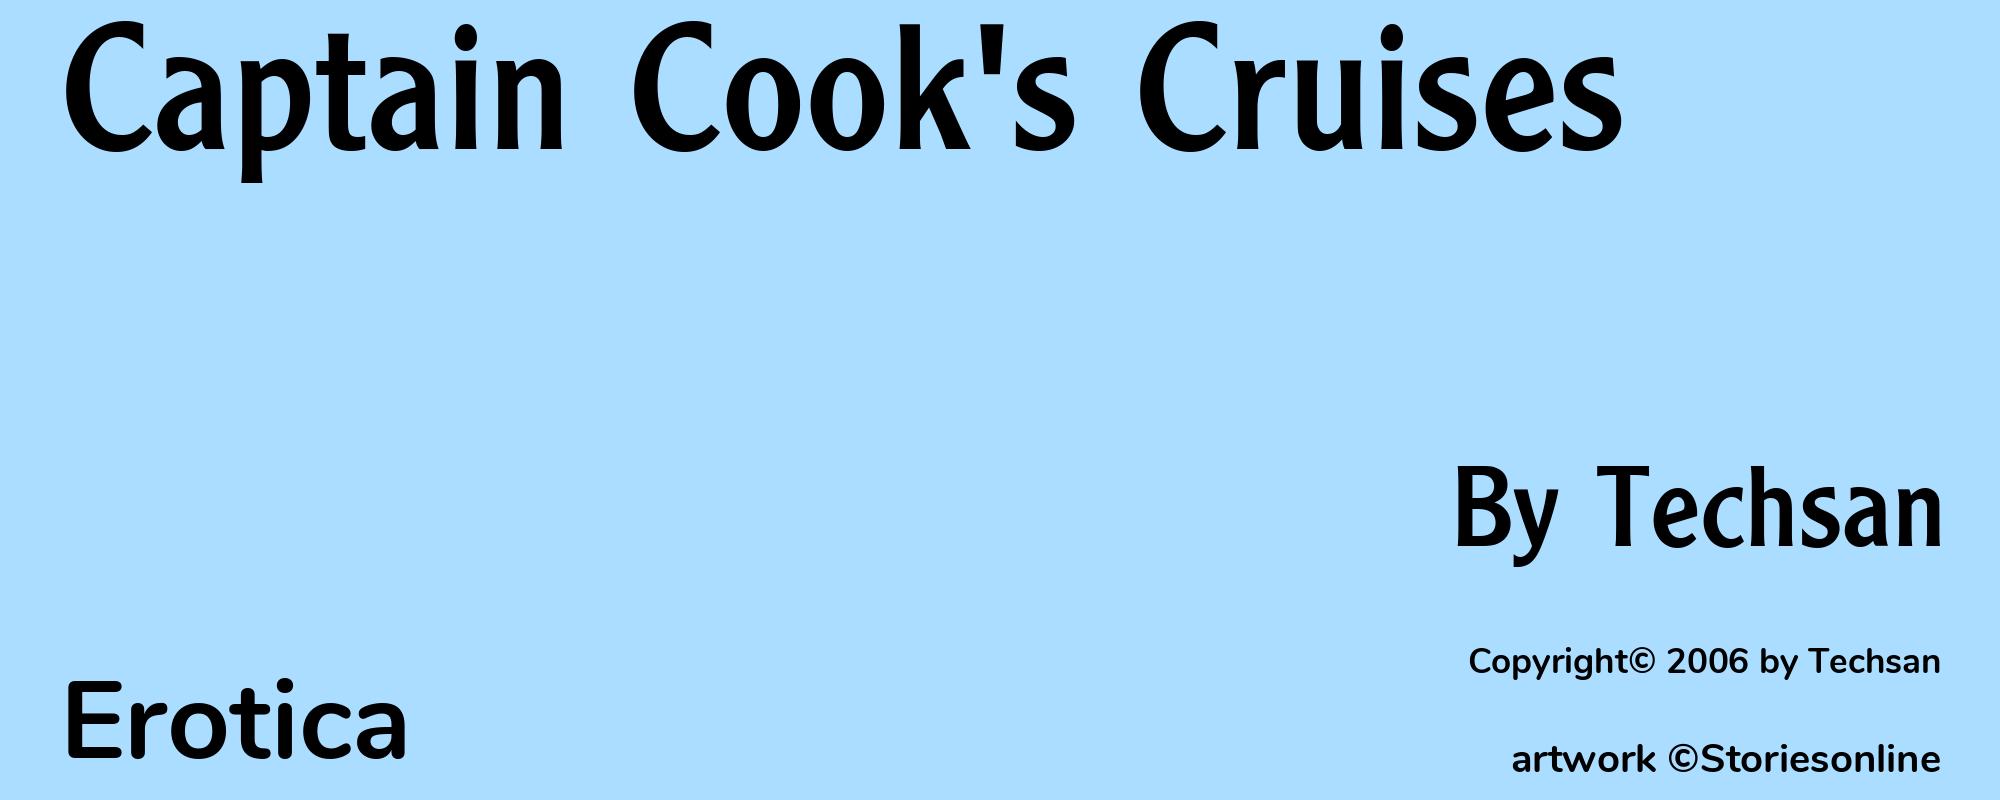 Captain Cook's Cruises - Cover